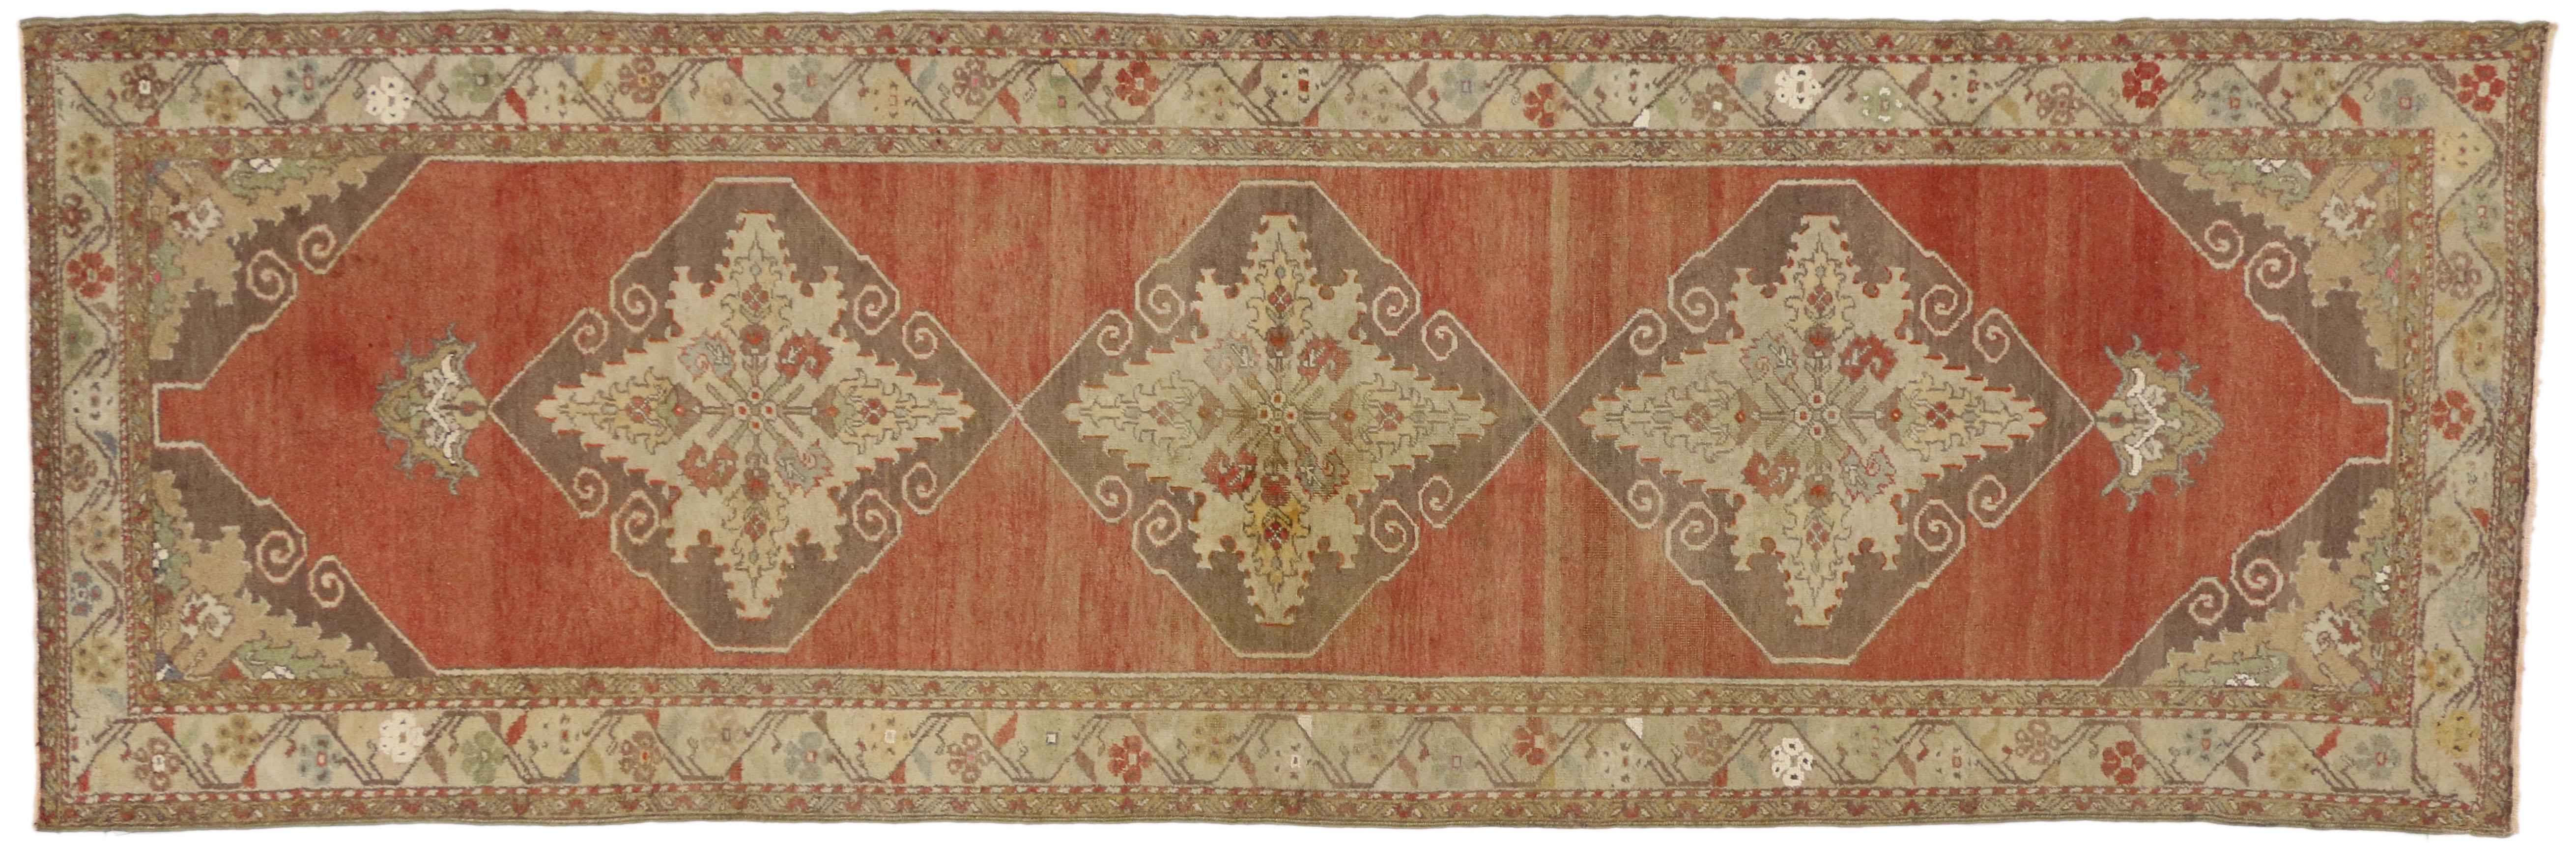 50646, vintage Turkish Oushak runner, hallway runner. This hand knotted wool vintage Turkish Oushak runner features three connected hexagonal medallions with interior palmette and lanceolate leaf designs and palmette pendants across an abrashed